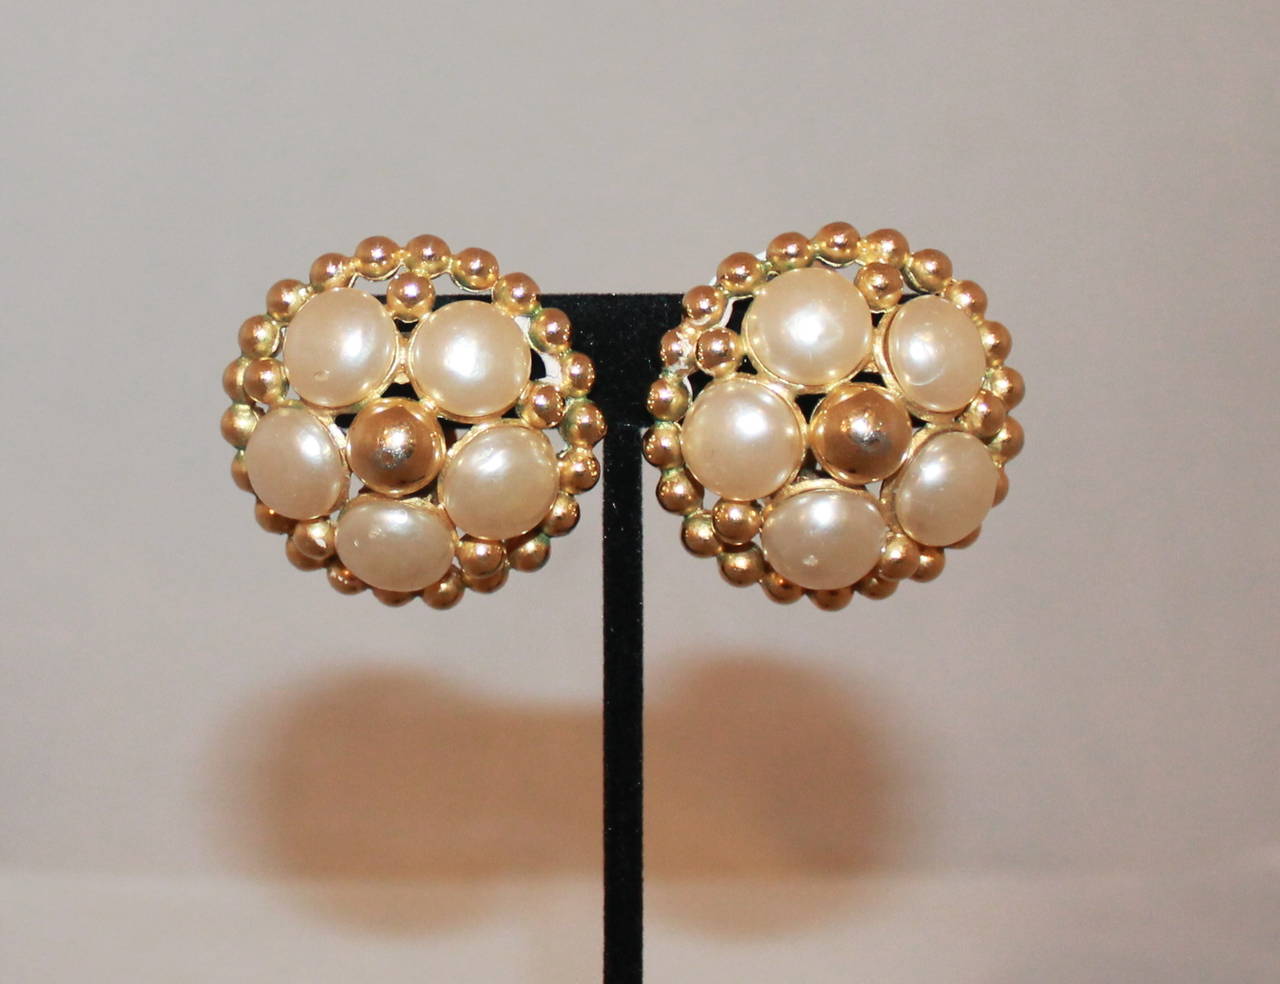 Chanel Vintage Goldtone Flower Pearl Clip-On Earrings - circa 1988. These earrings are in good vintage condition with some signs of wear. The back of the earrings has some greening on the gold. 

Length- 1.5